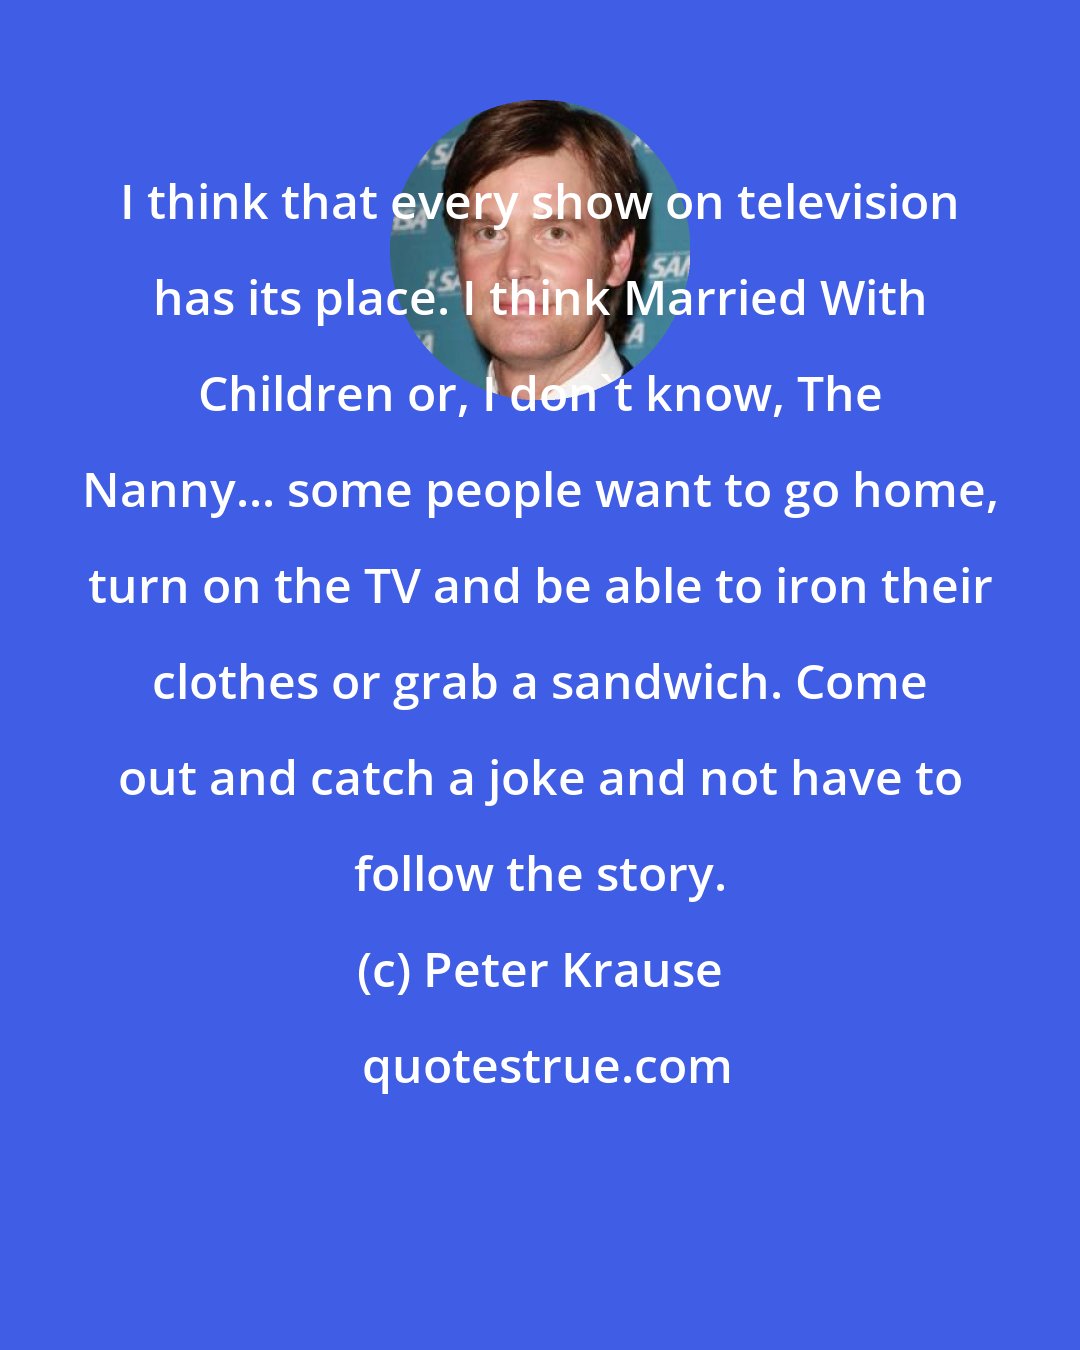 Peter Krause: I think that every show on television has its place. I think Married With Children or, I don't know, The Nanny... some people want to go home, turn on the TV and be able to iron their clothes or grab a sandwich. Come out and catch a joke and not have to follow the story.